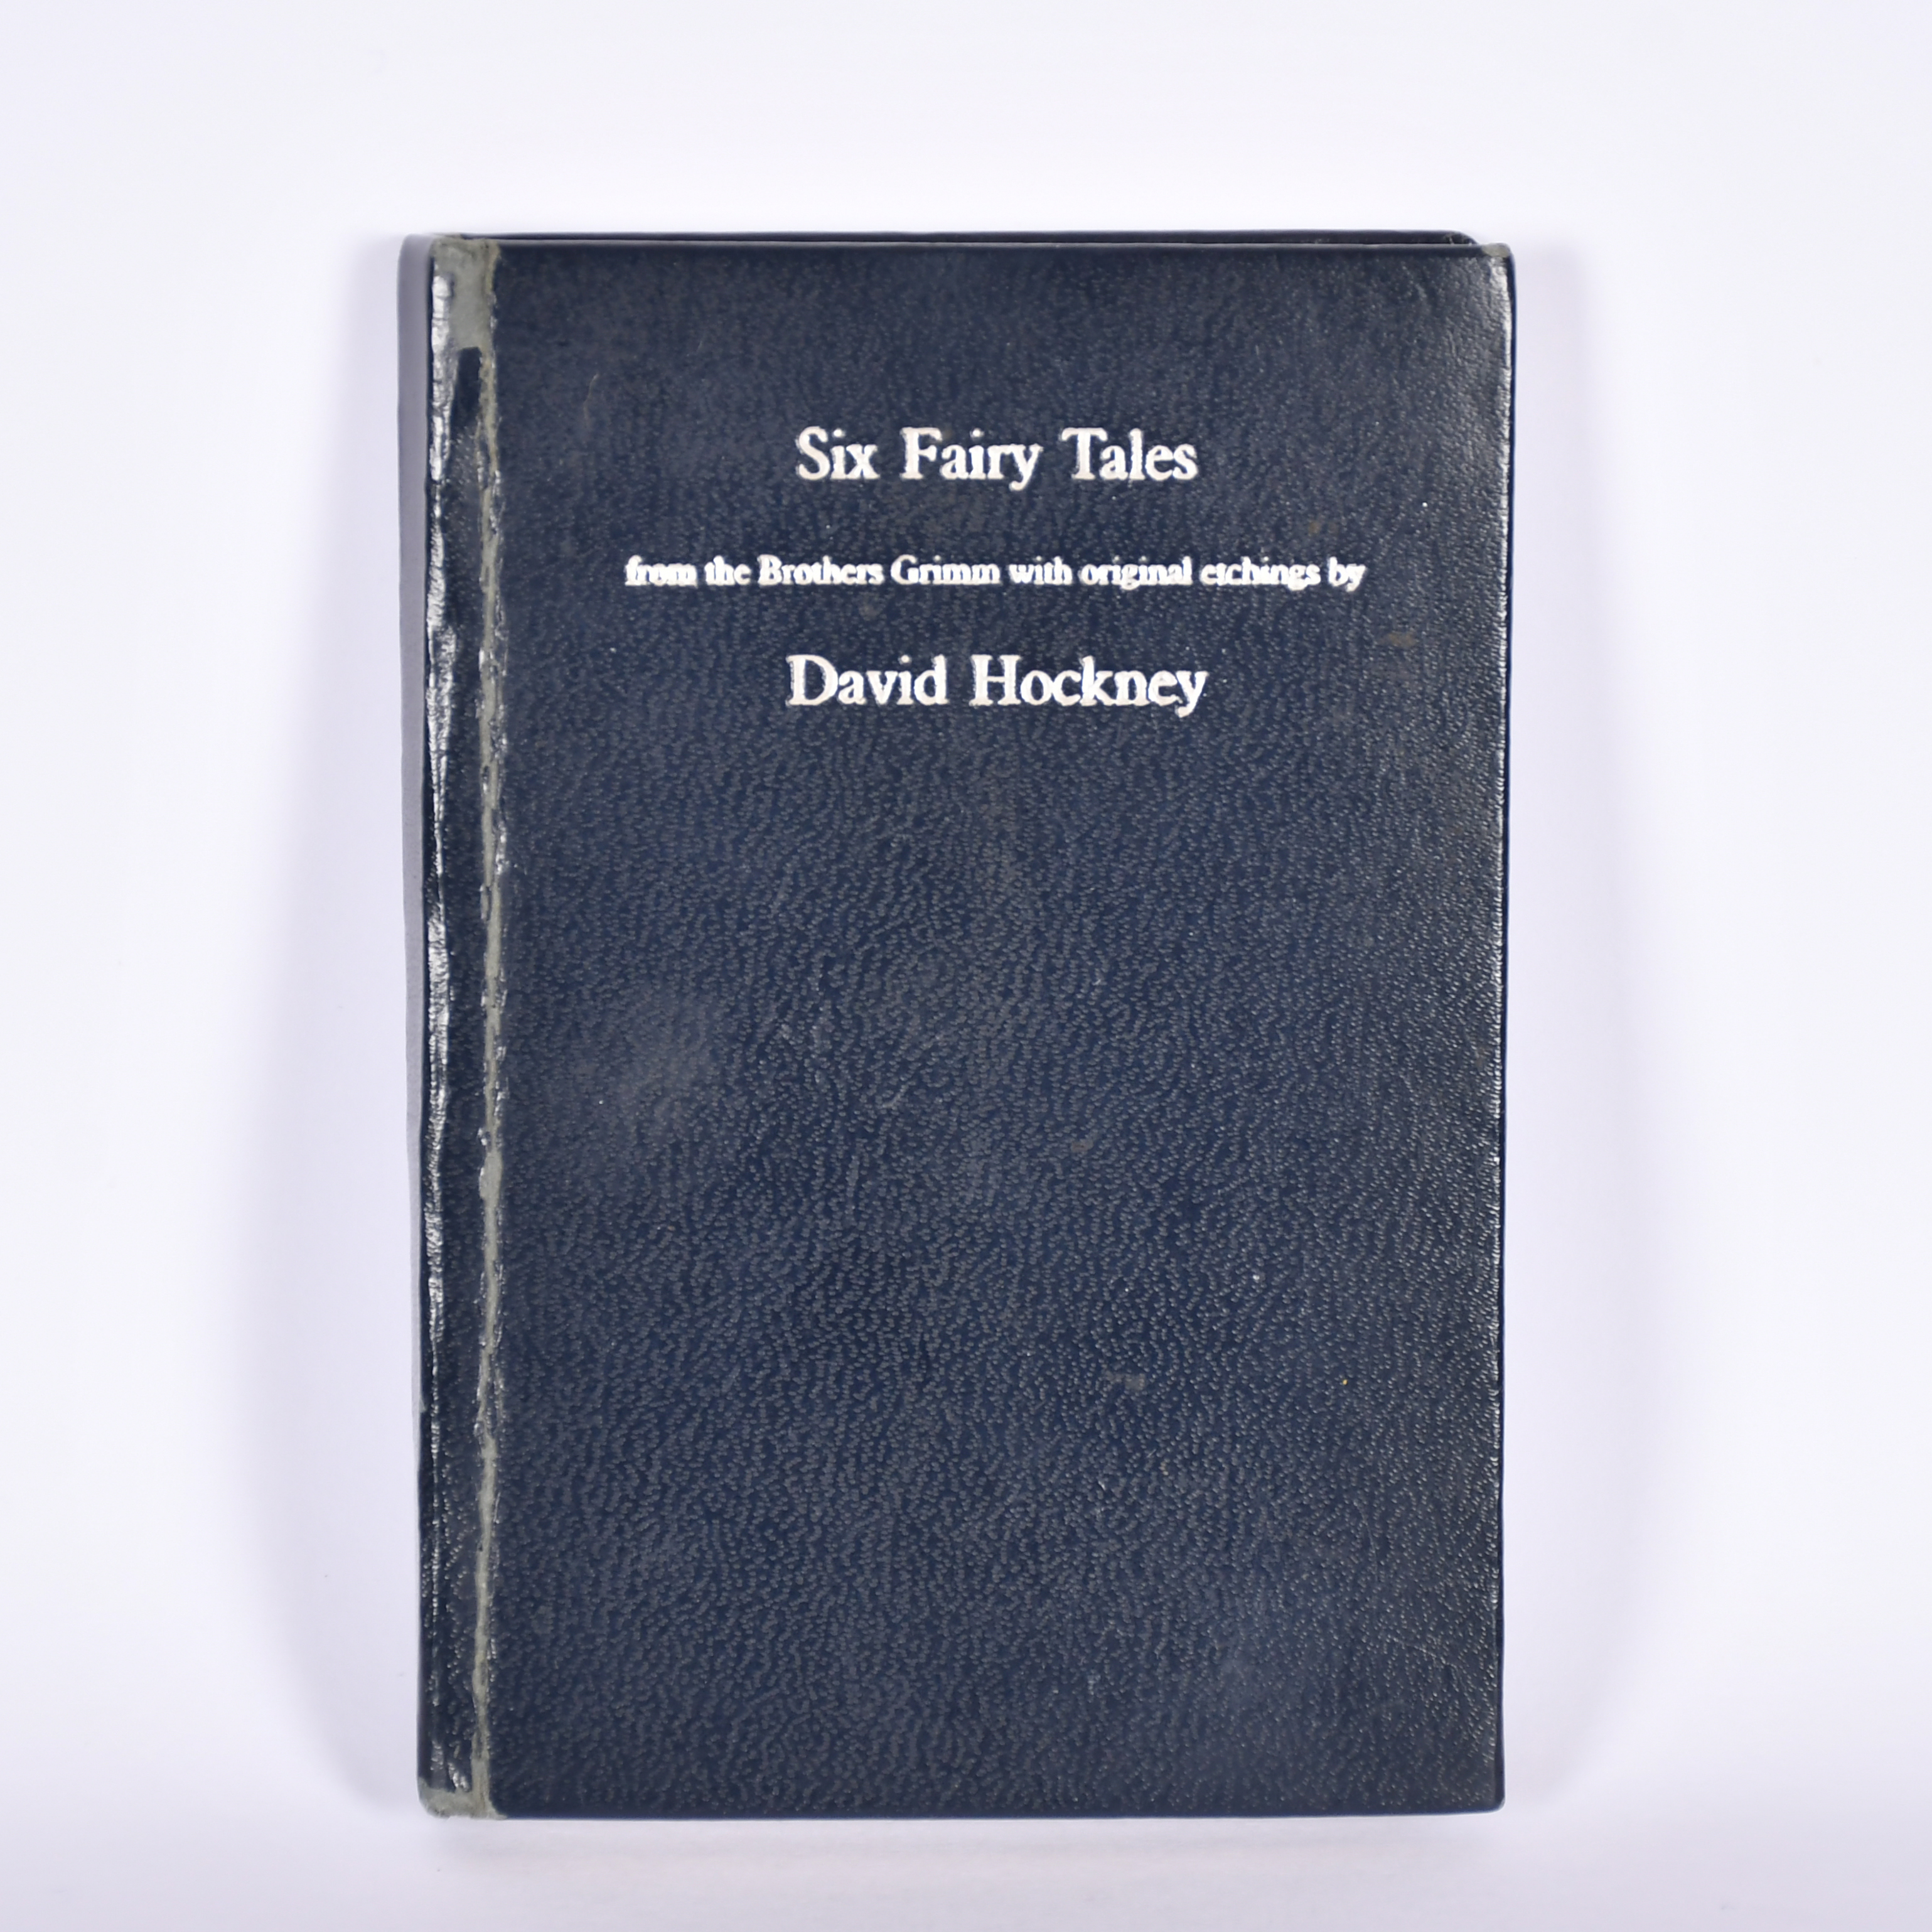 David Hockney (1937-) British. "Six Fairy Tales" from The Brothers Grimm, Miniature book, Signed - Image 2 of 5